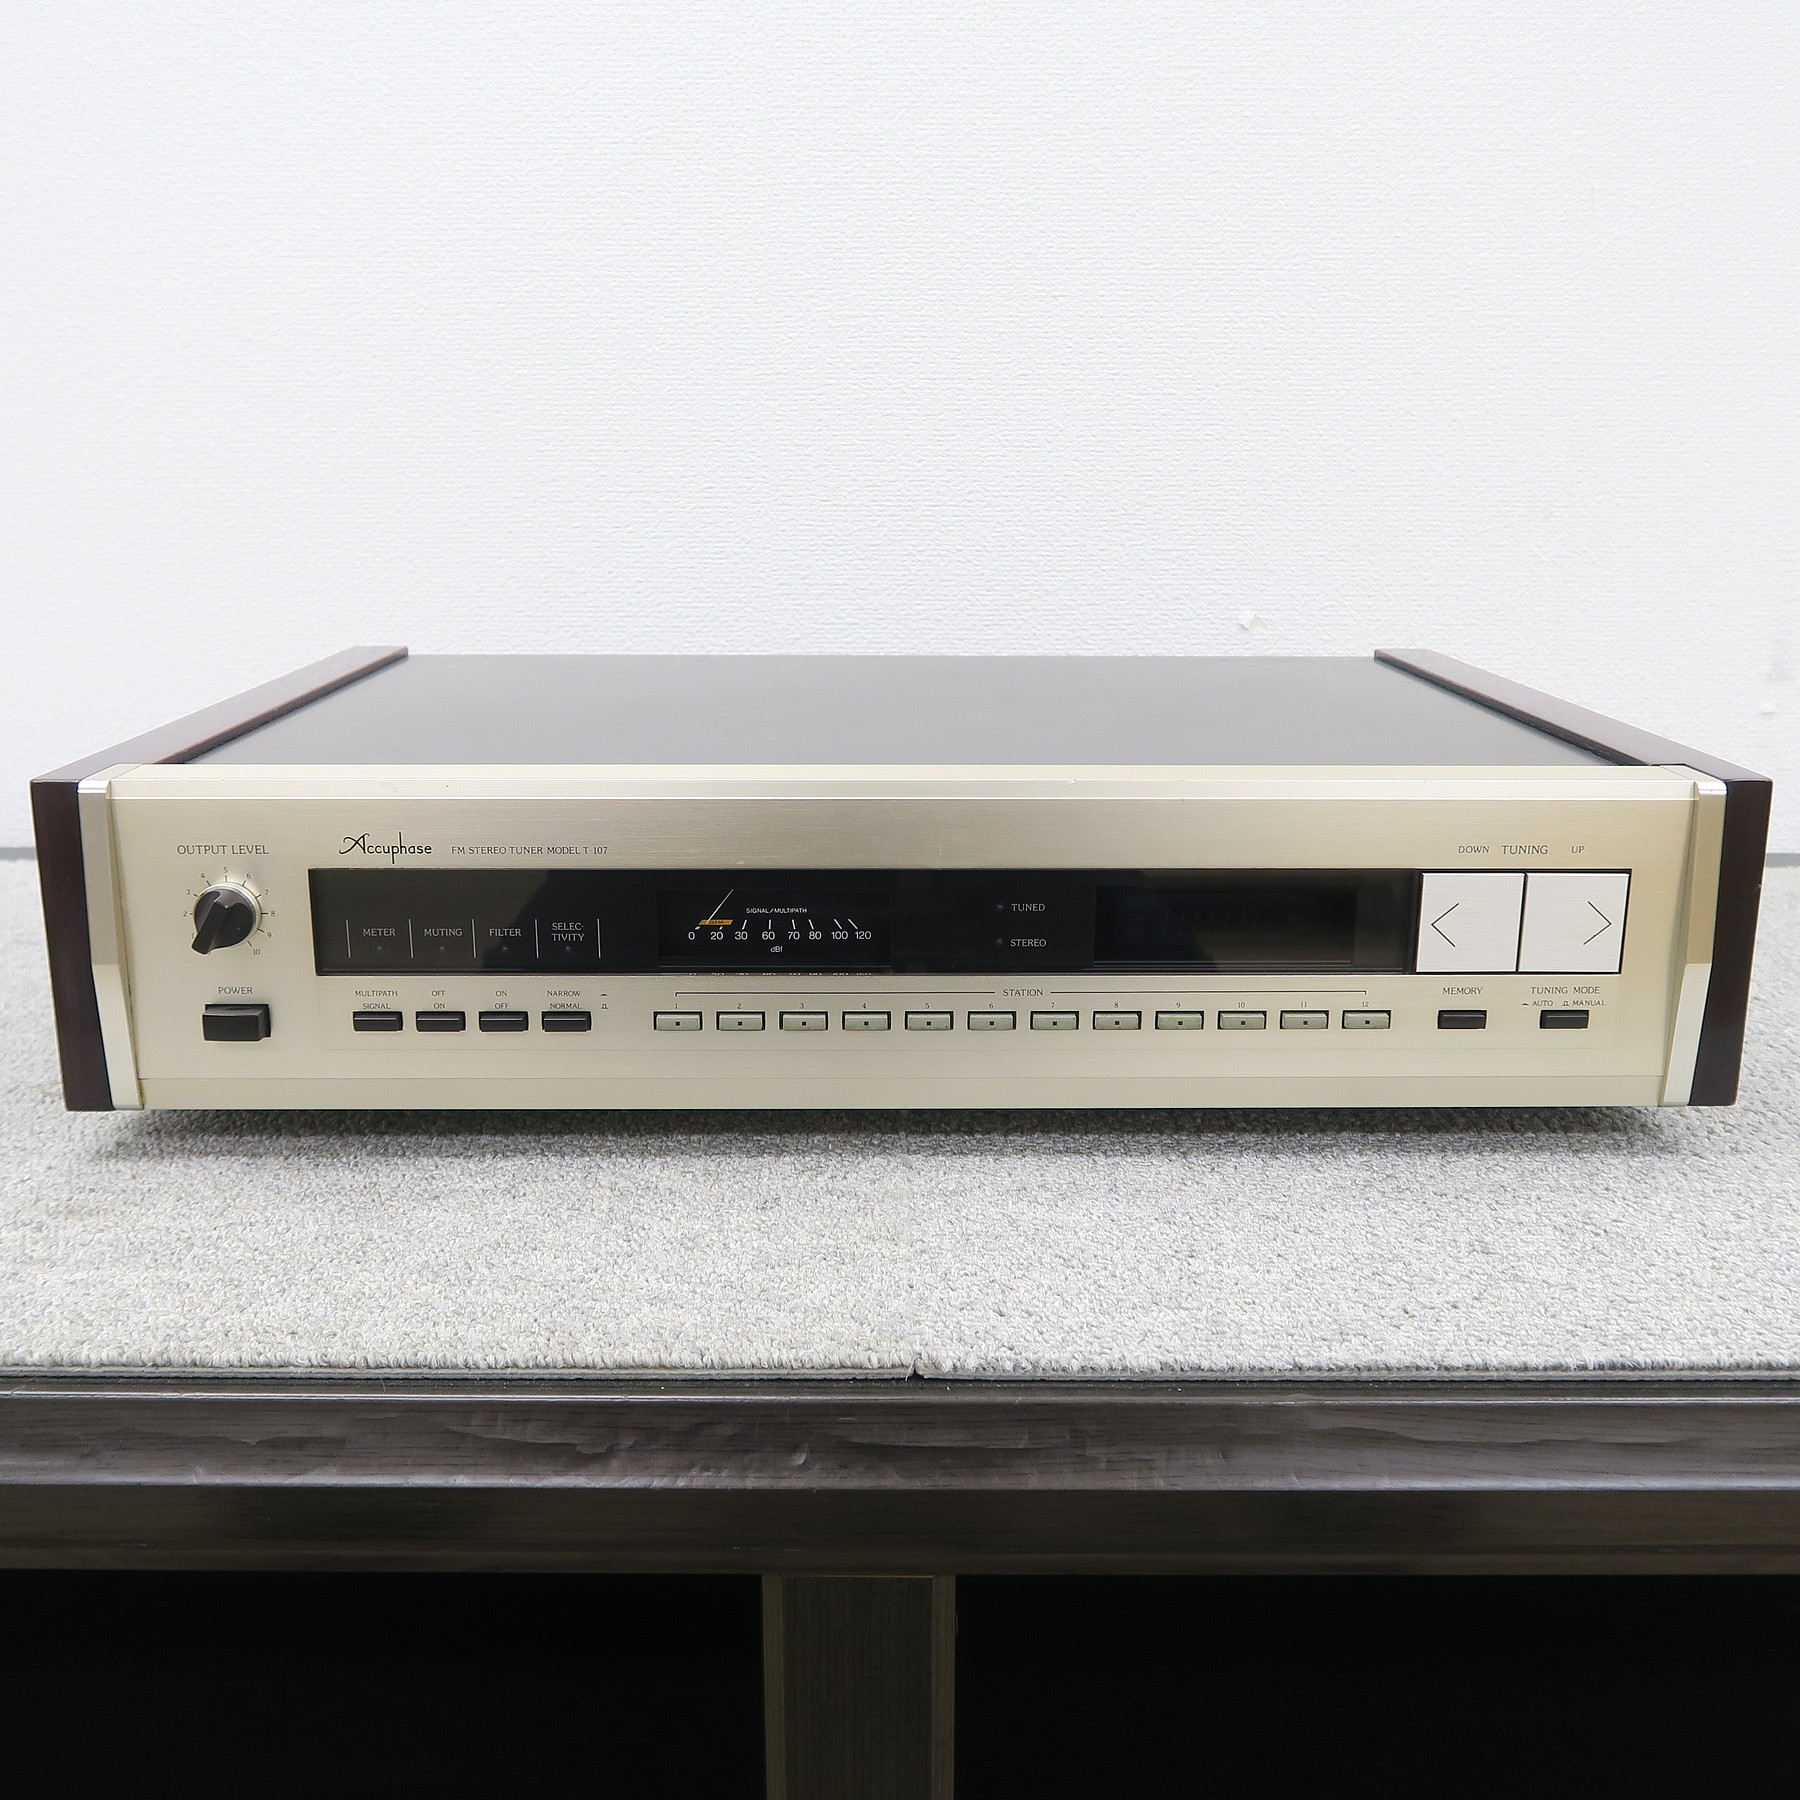 Aランク】アキュフェーズ Accuphase T-107 チューナー @55277 / 中古 